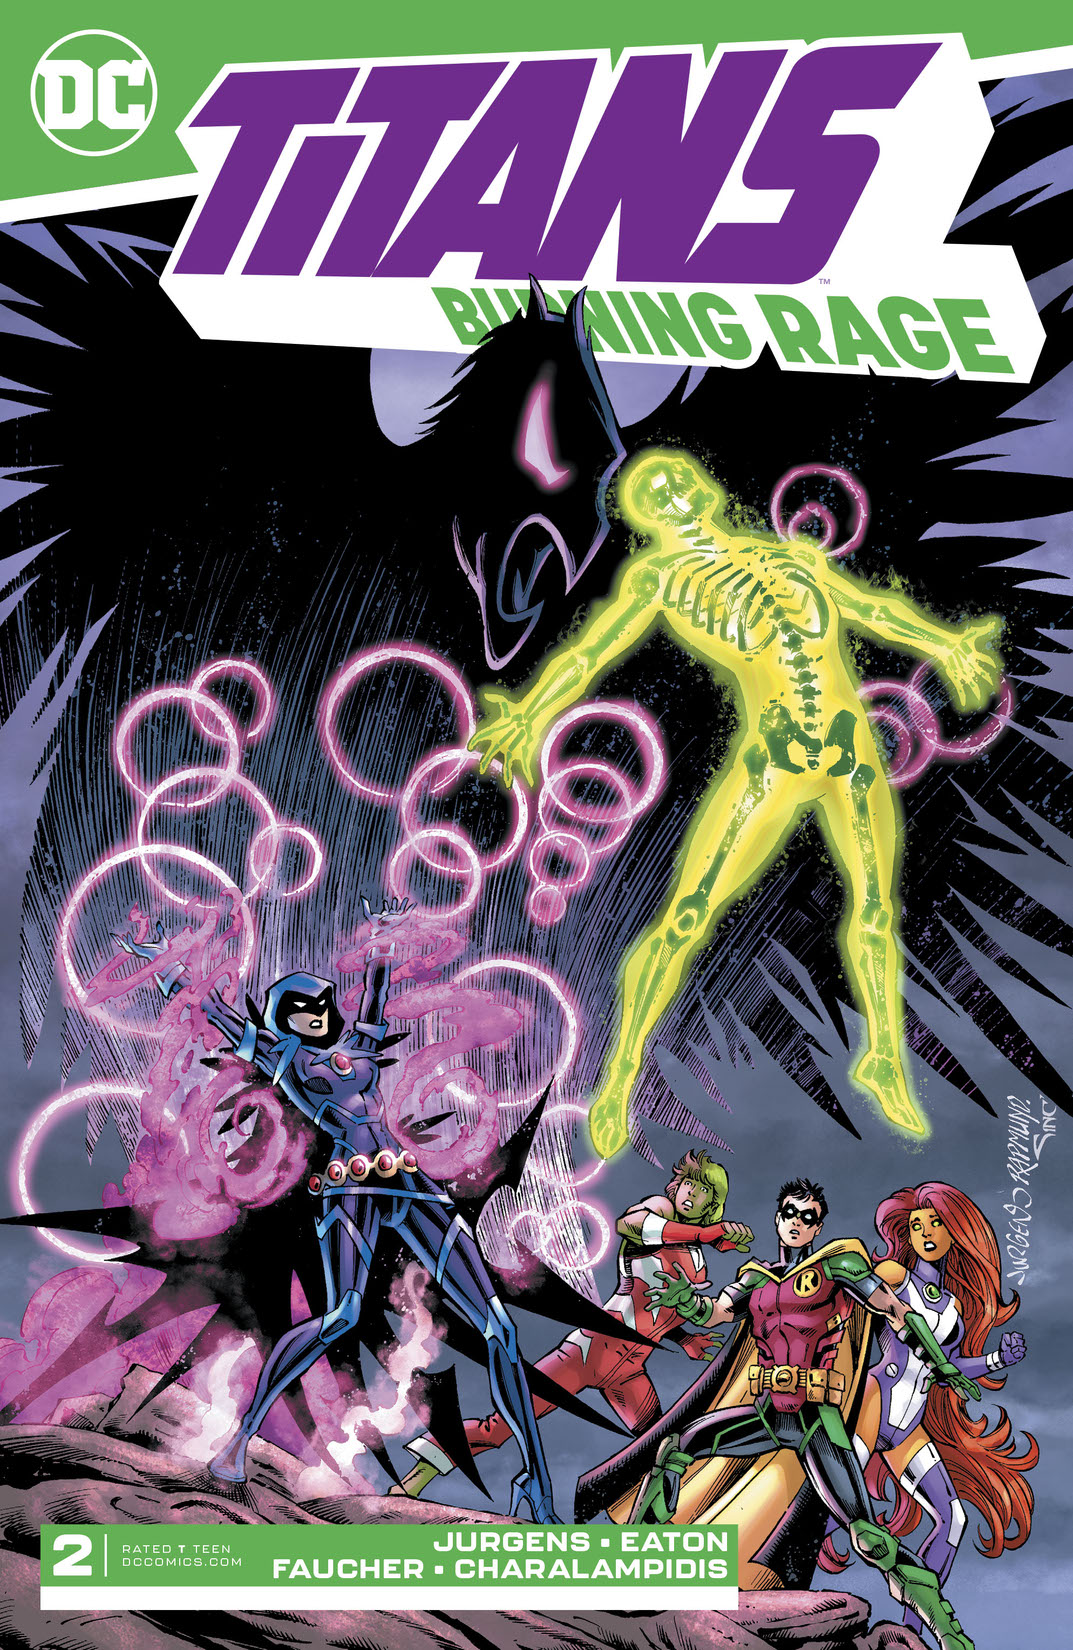 Titans: Burning Rage #2 preview images